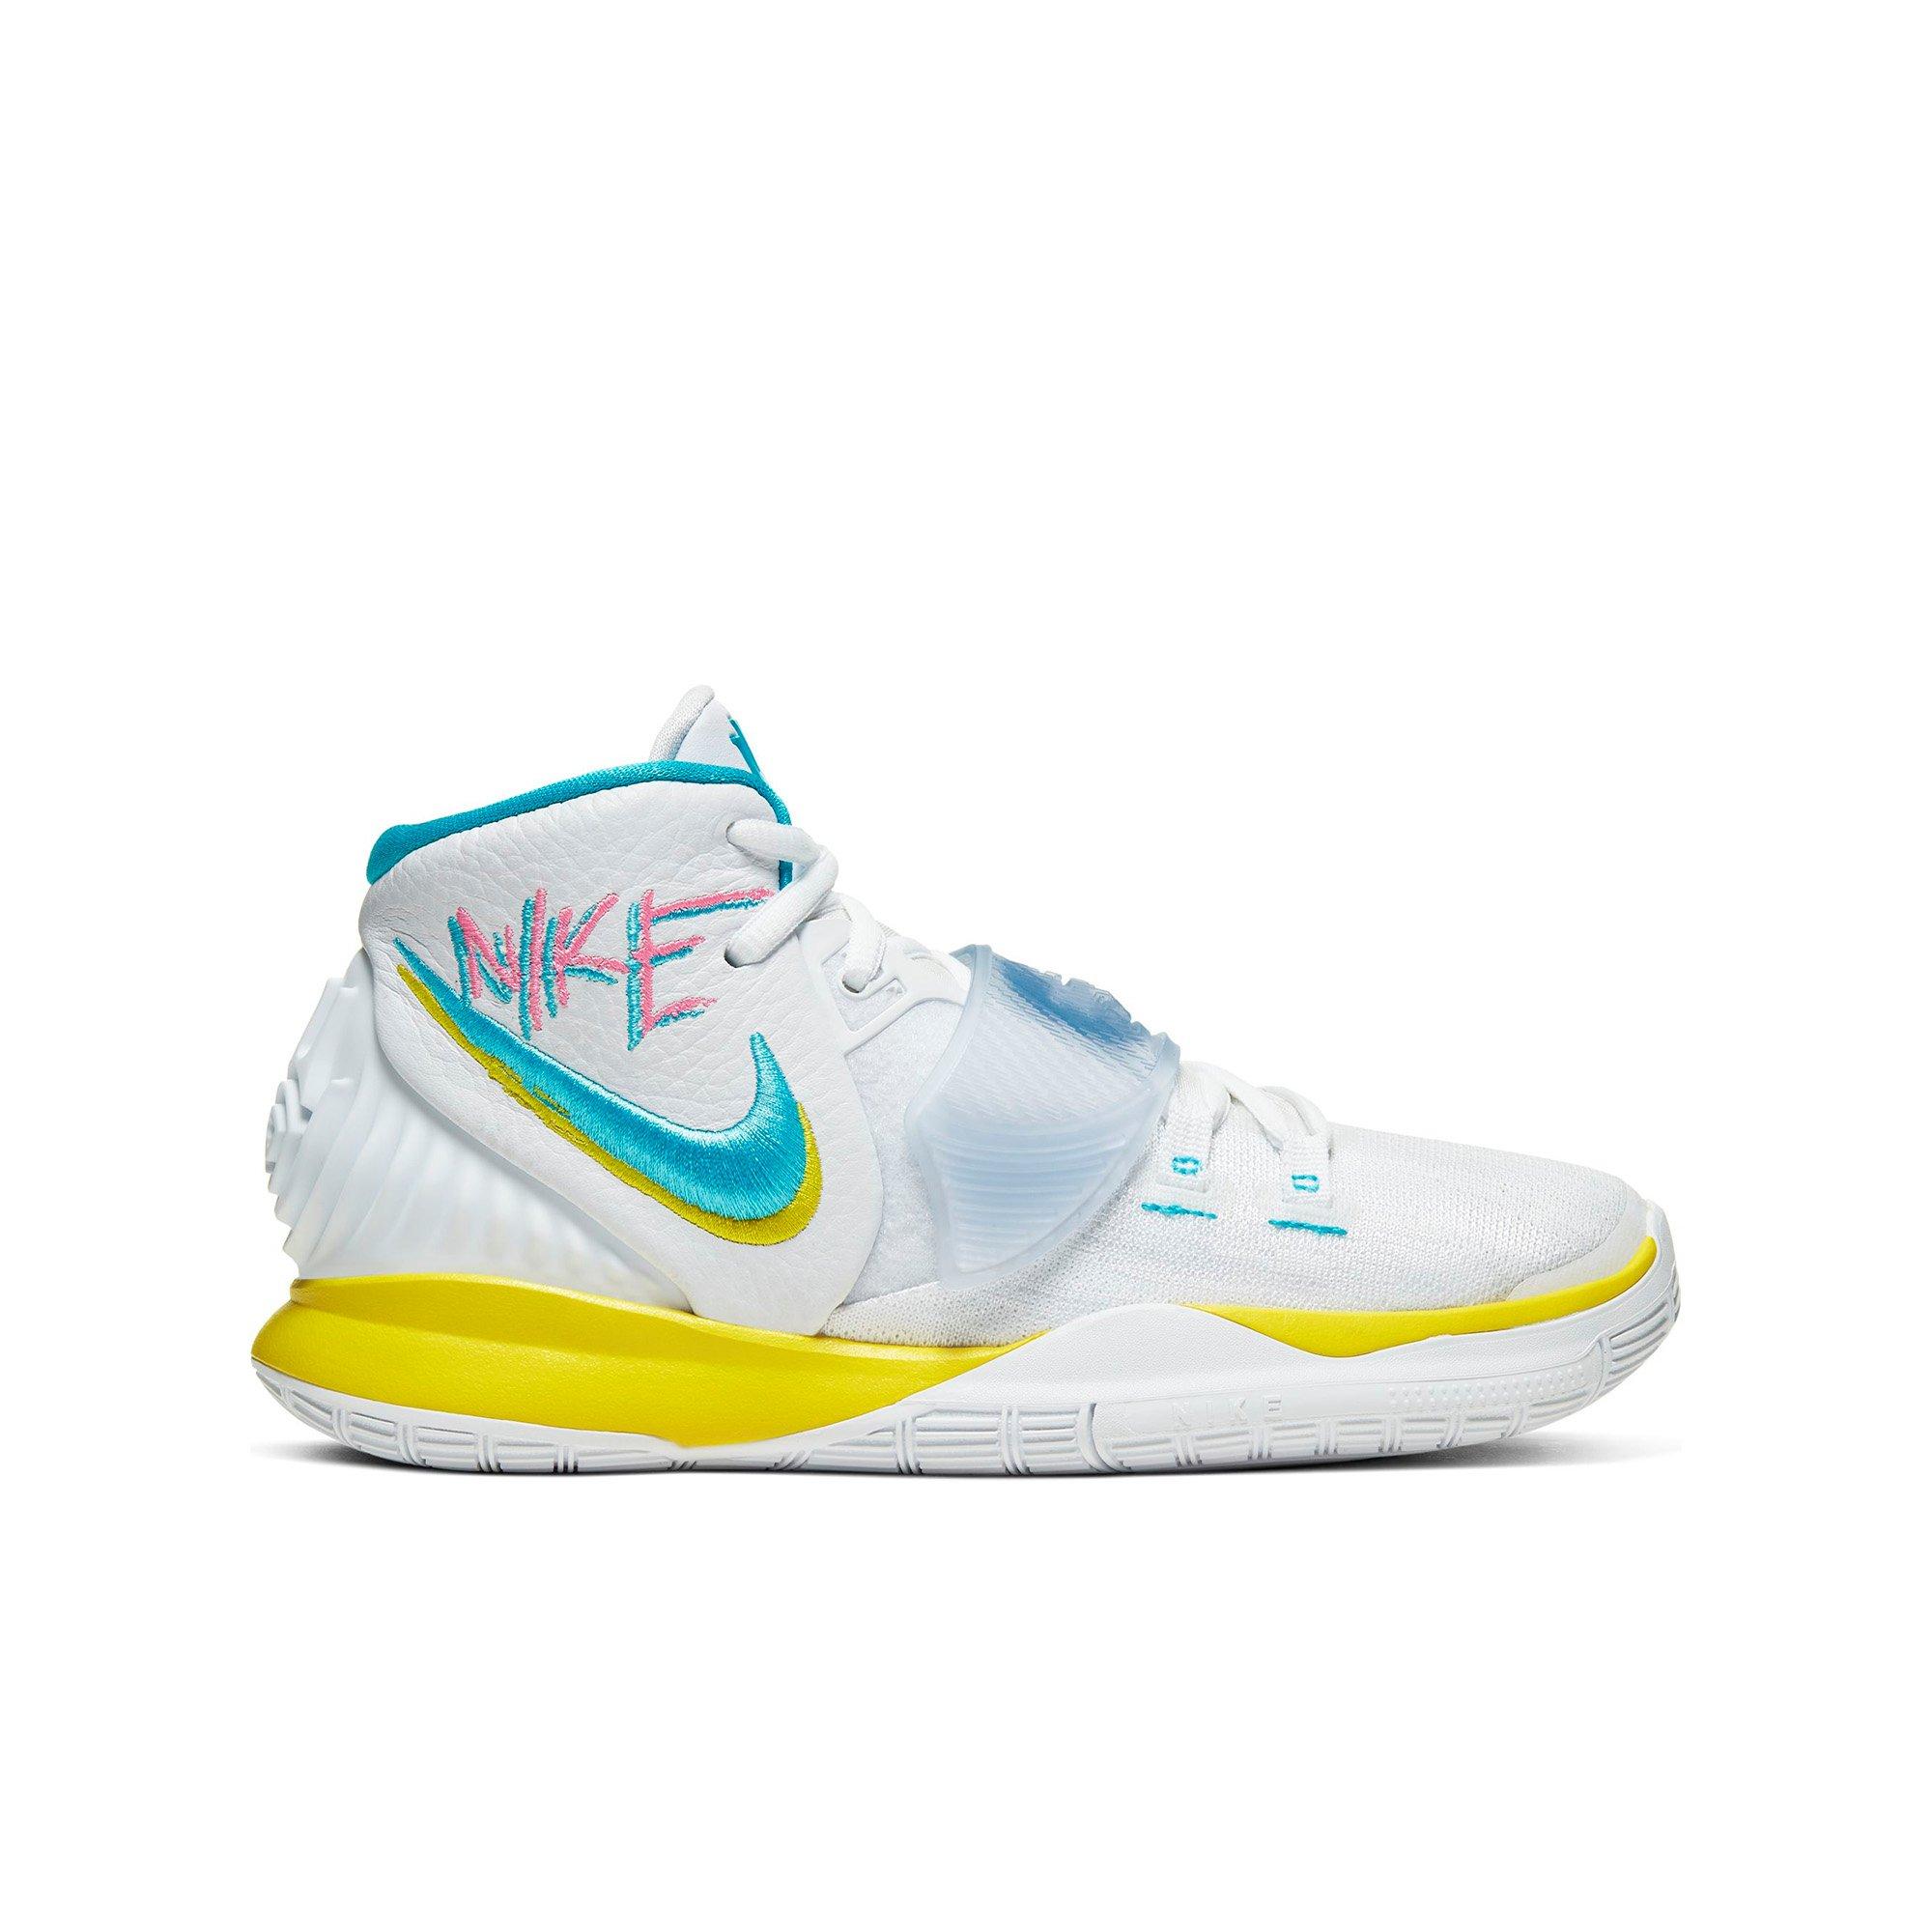 kyrie 5 yellow and blue